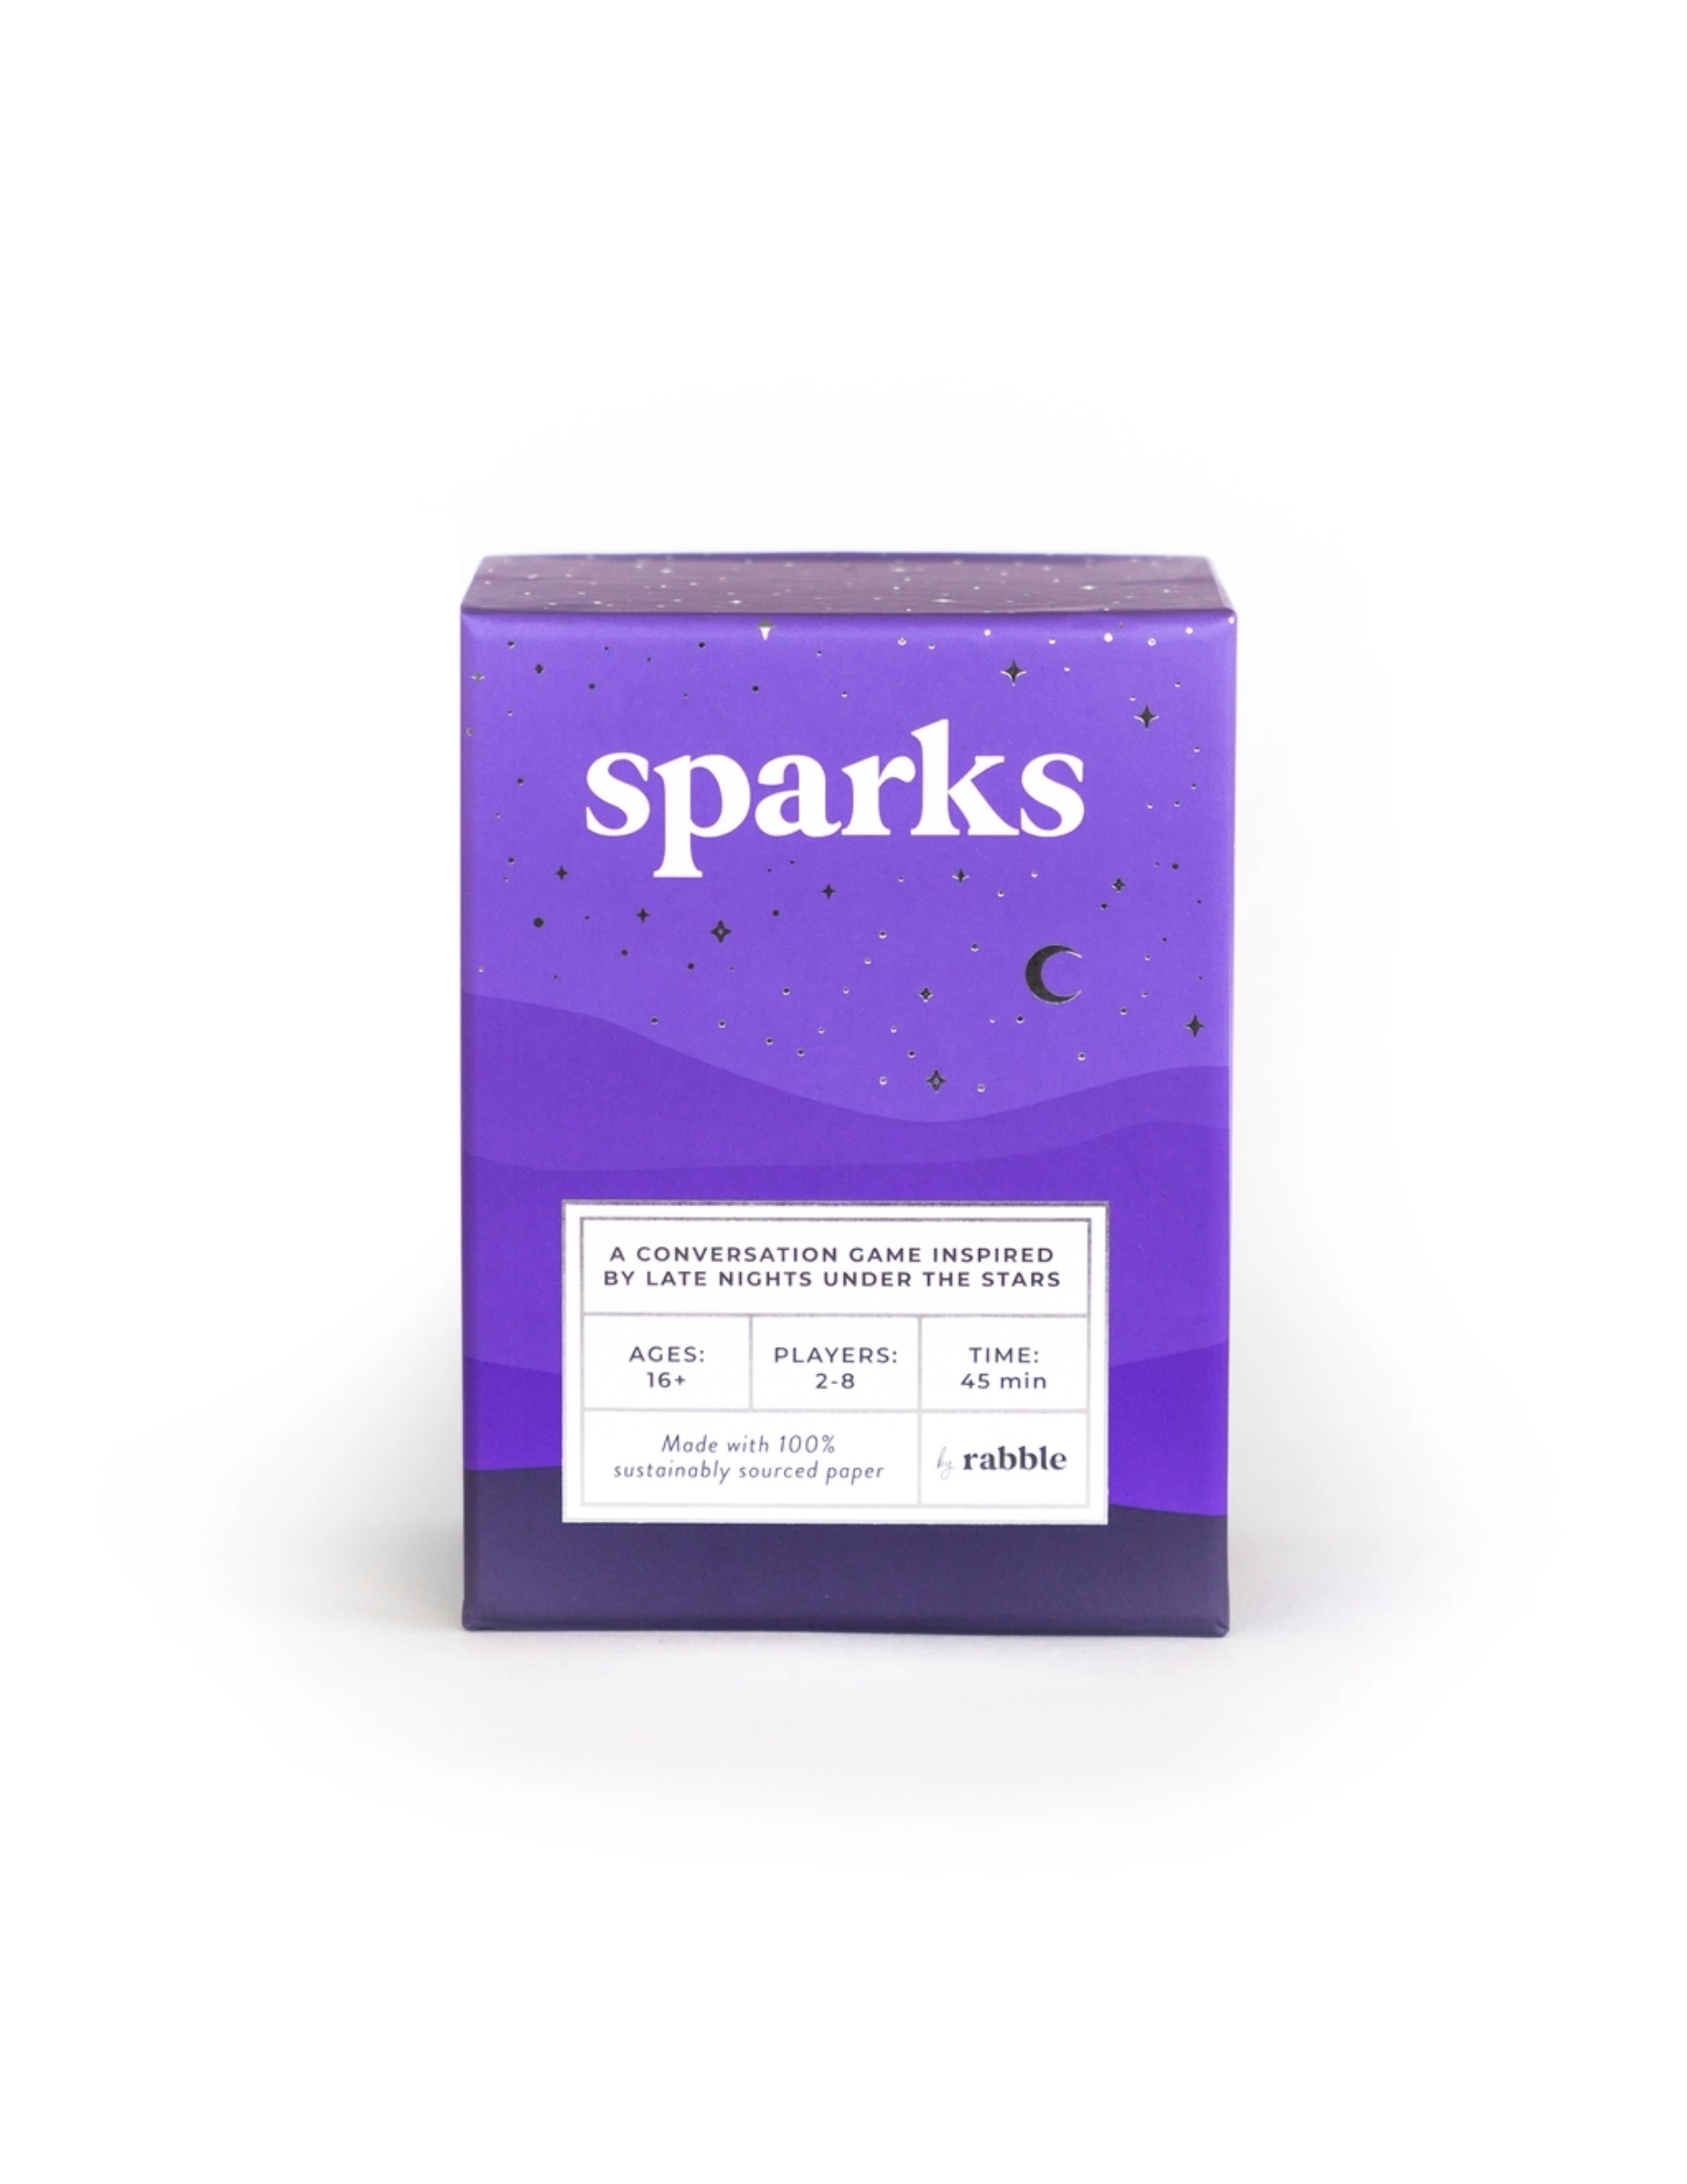 Sparks: A Conversation Card Game Inspired by the Stars